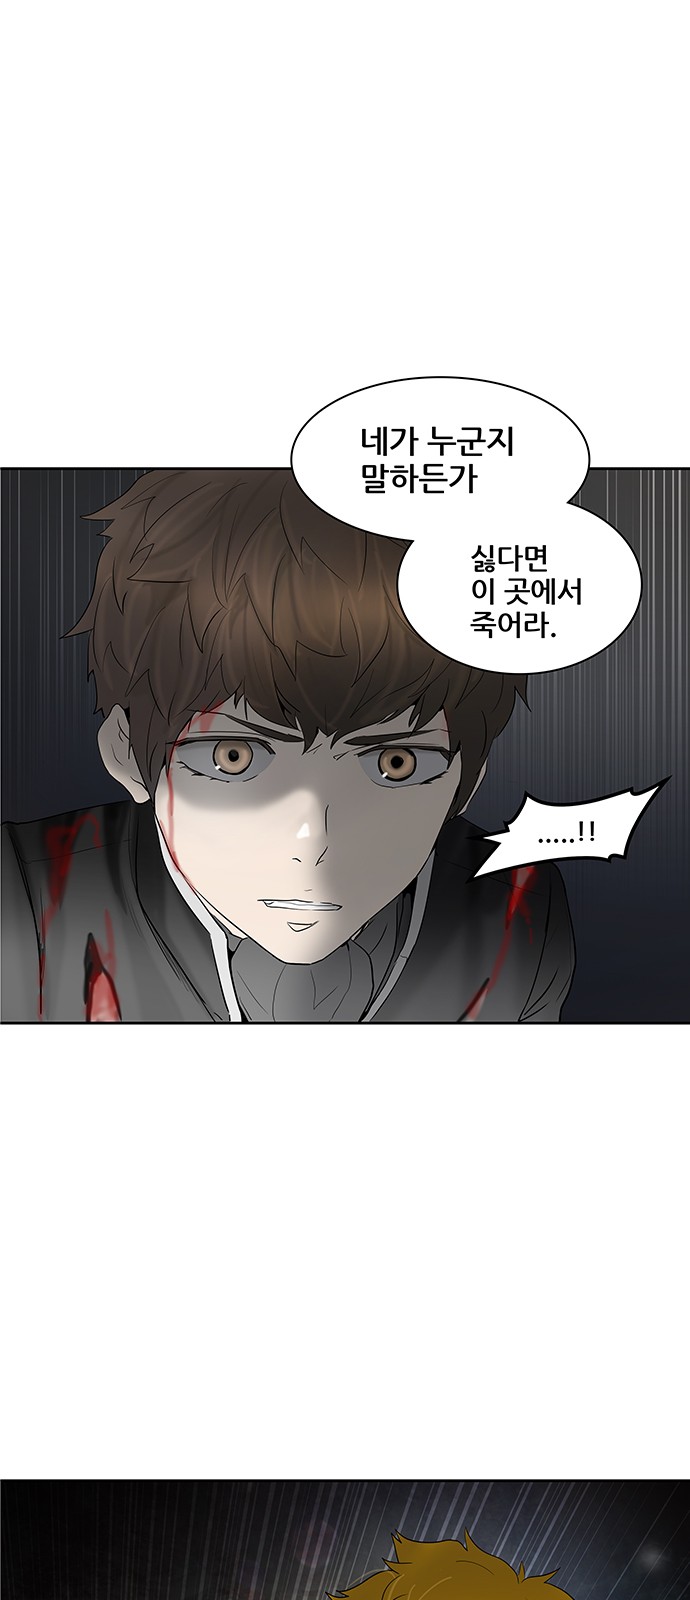 Tower of God - Chapter 368 - Page 1